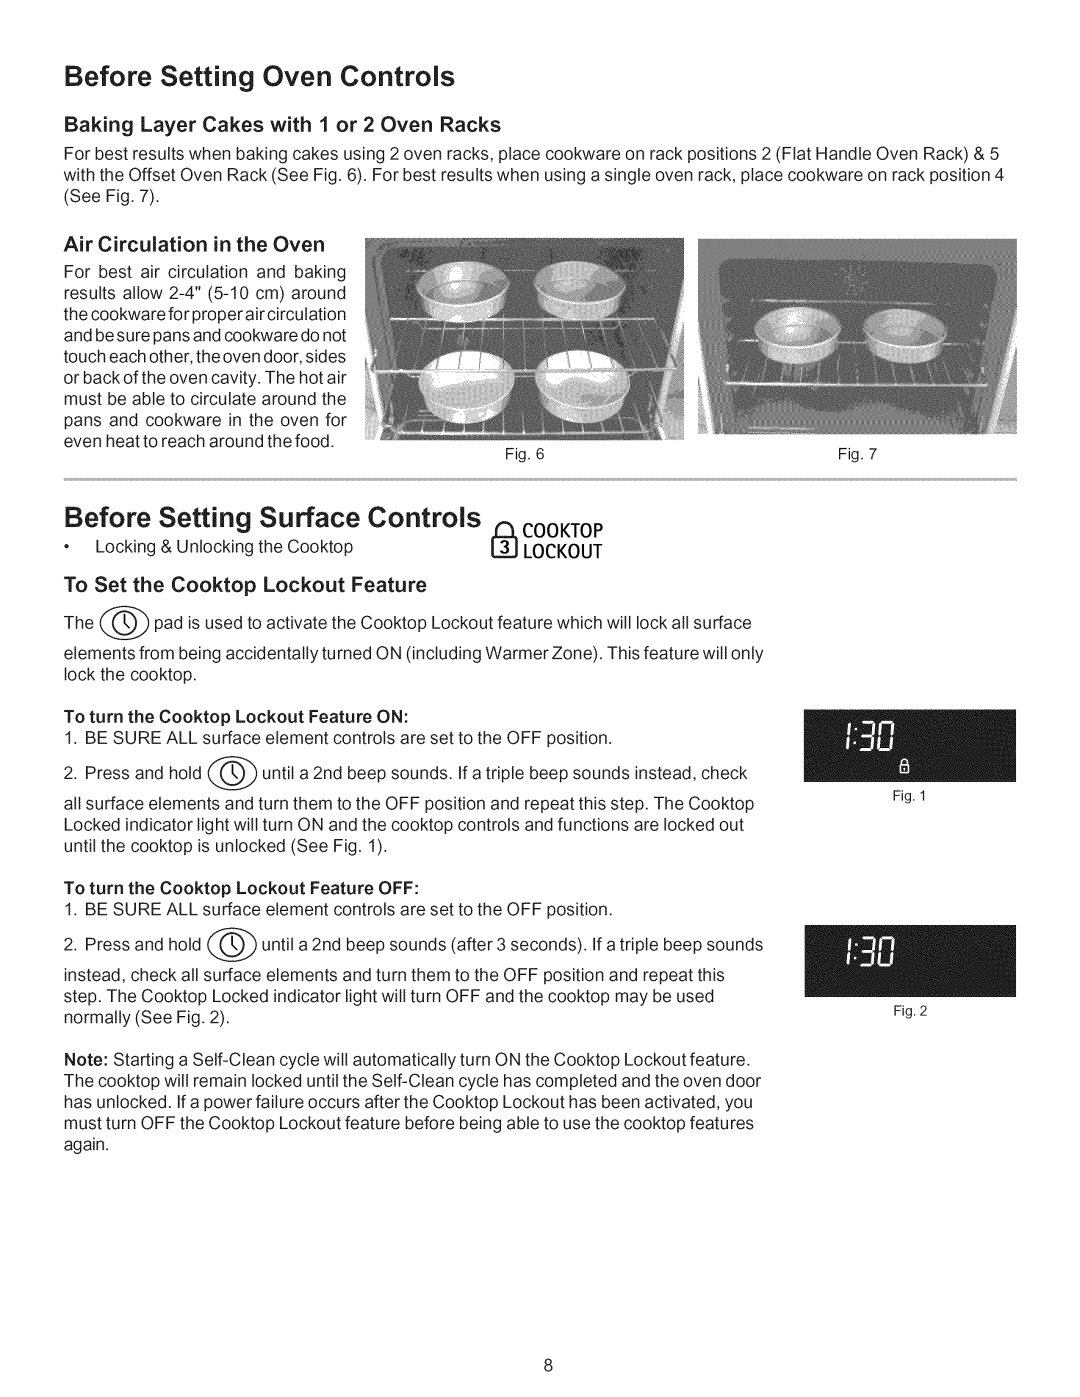 Kenmore 790.9662 manual Before Setting Surface Controls COOKTOP, Before Setting Oven Controls, Air Circulation in the Oven 